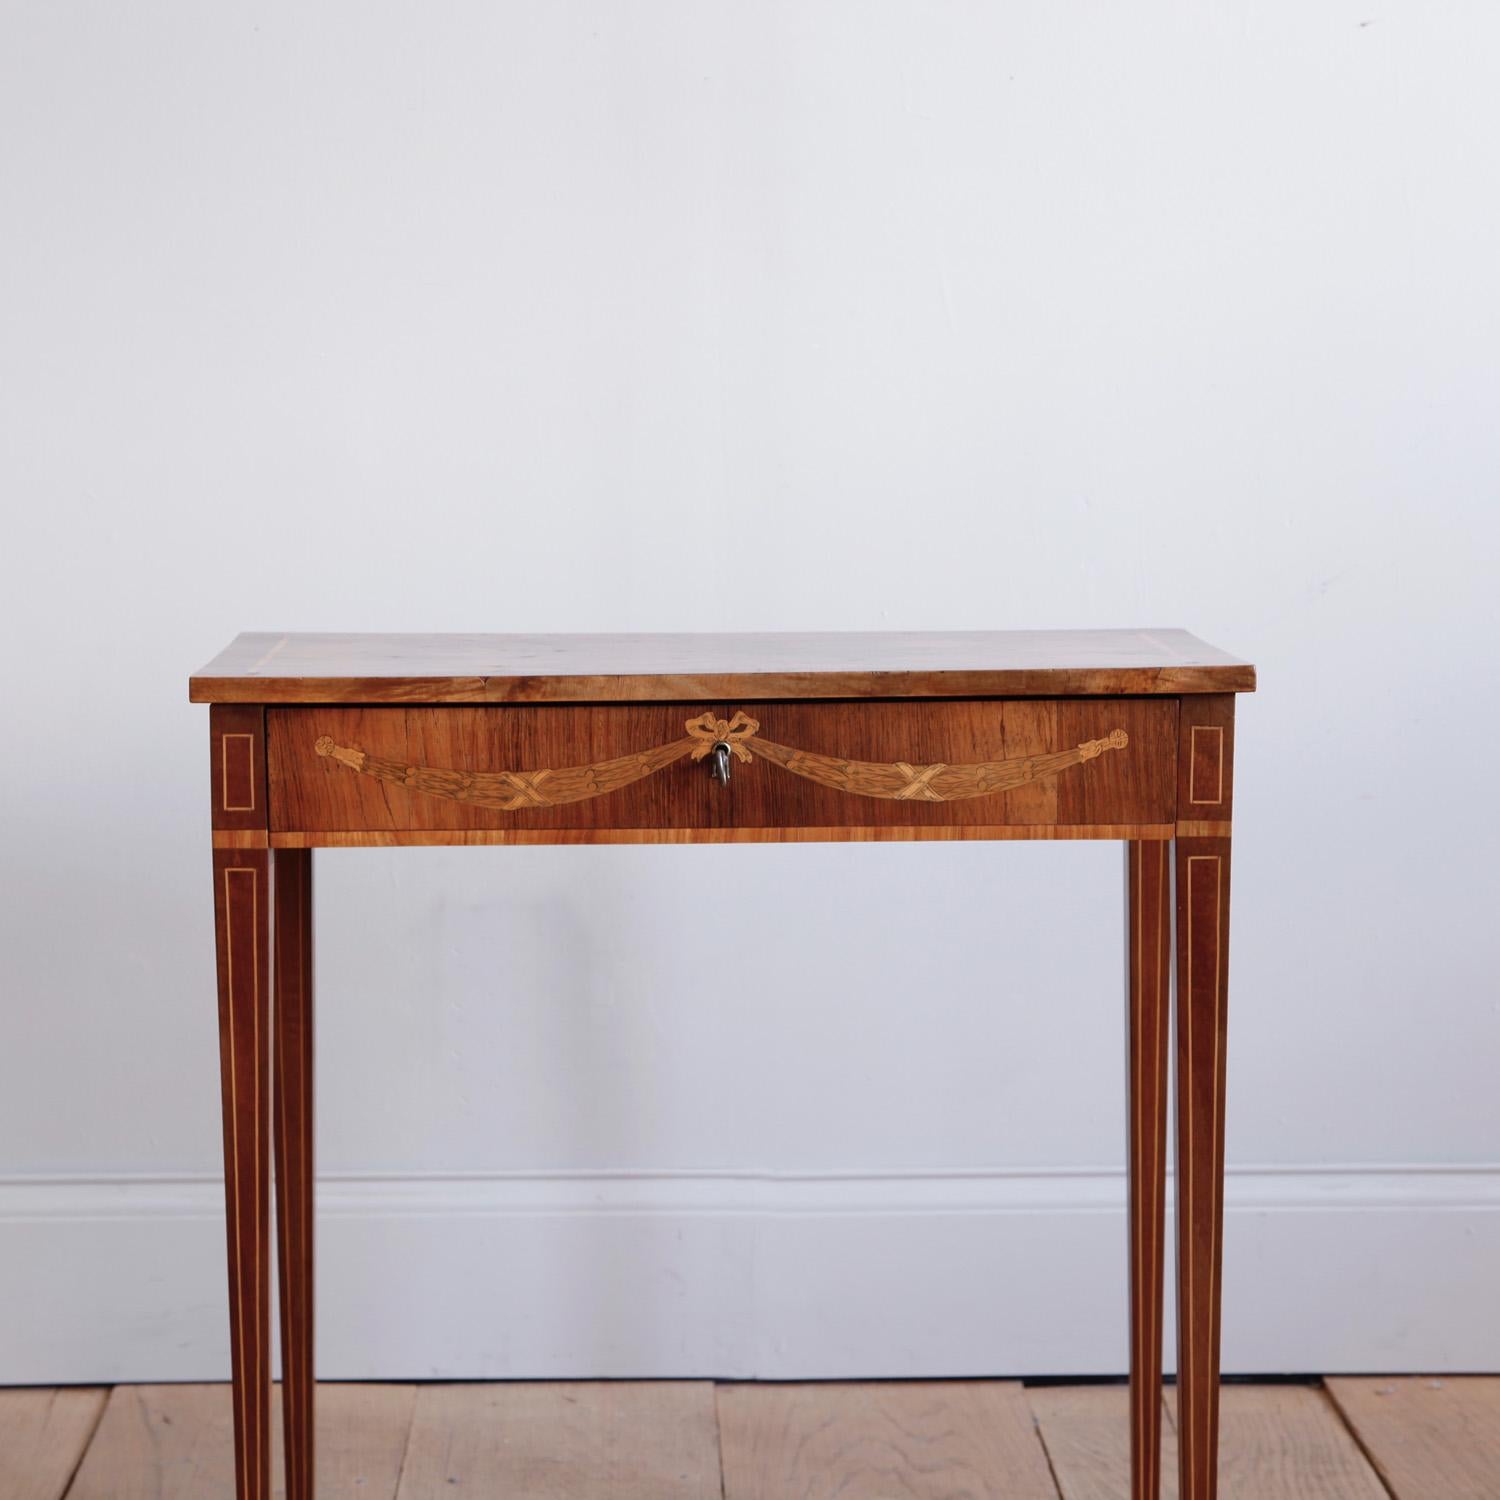 Late 18th Century Swedish Gustavian Occasional Table with Fruitwood Inlay In Good Condition For Sale In New York, NY